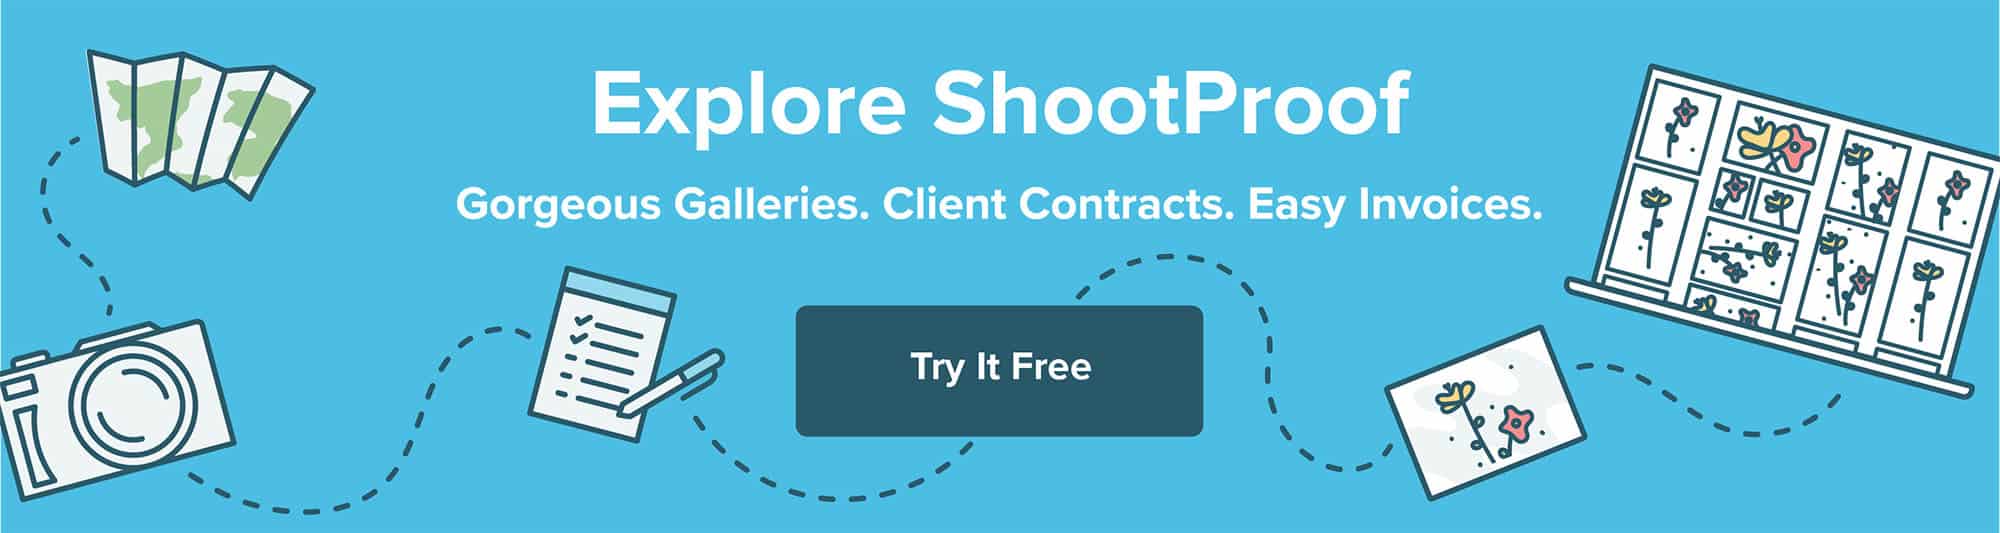 ShootProof Online Galleries, Client Contracts, Easy Invoices